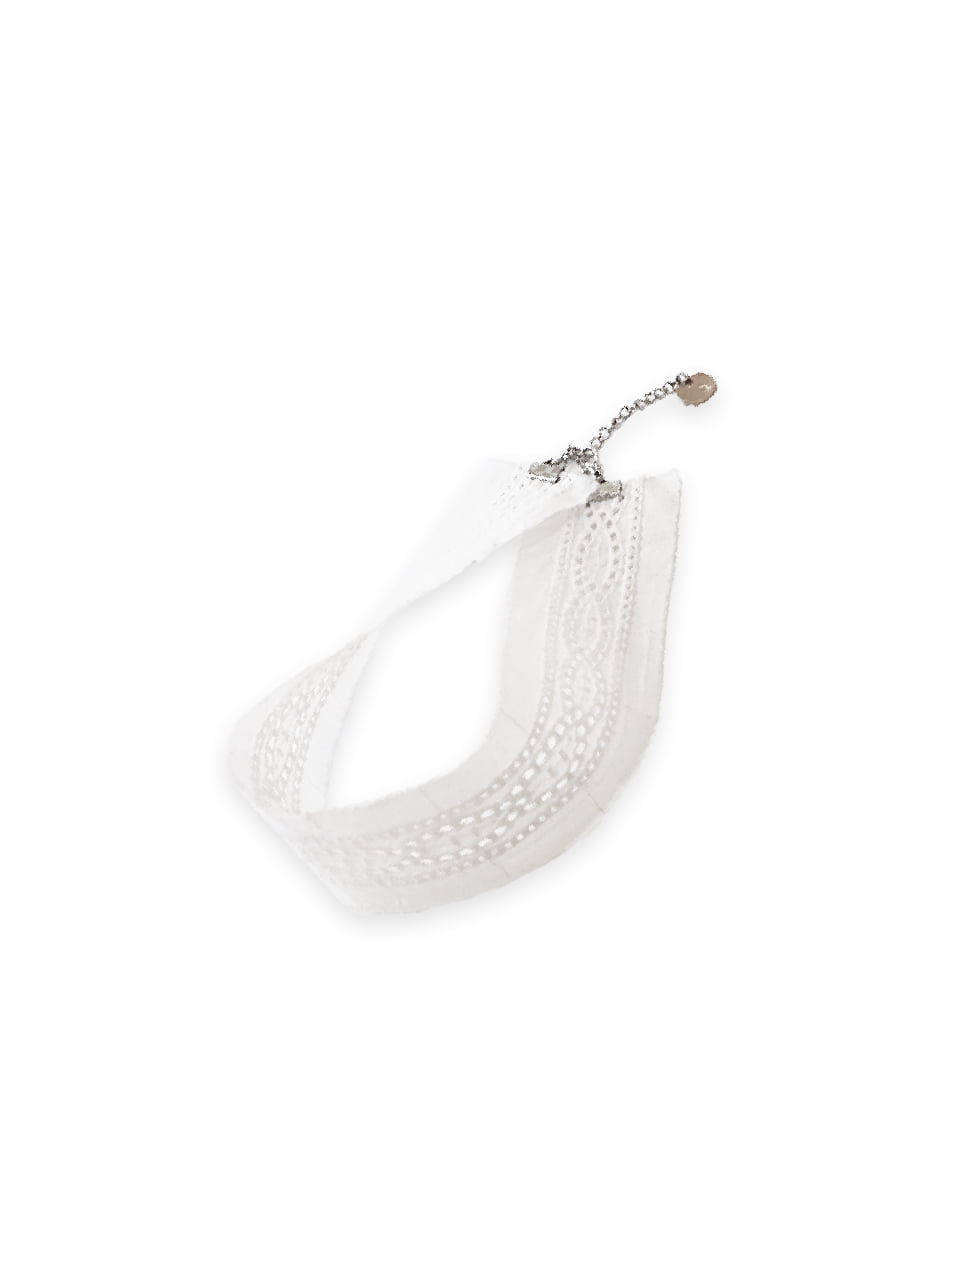 * BELL NECKLACE VINTAGE COTTON WHITE